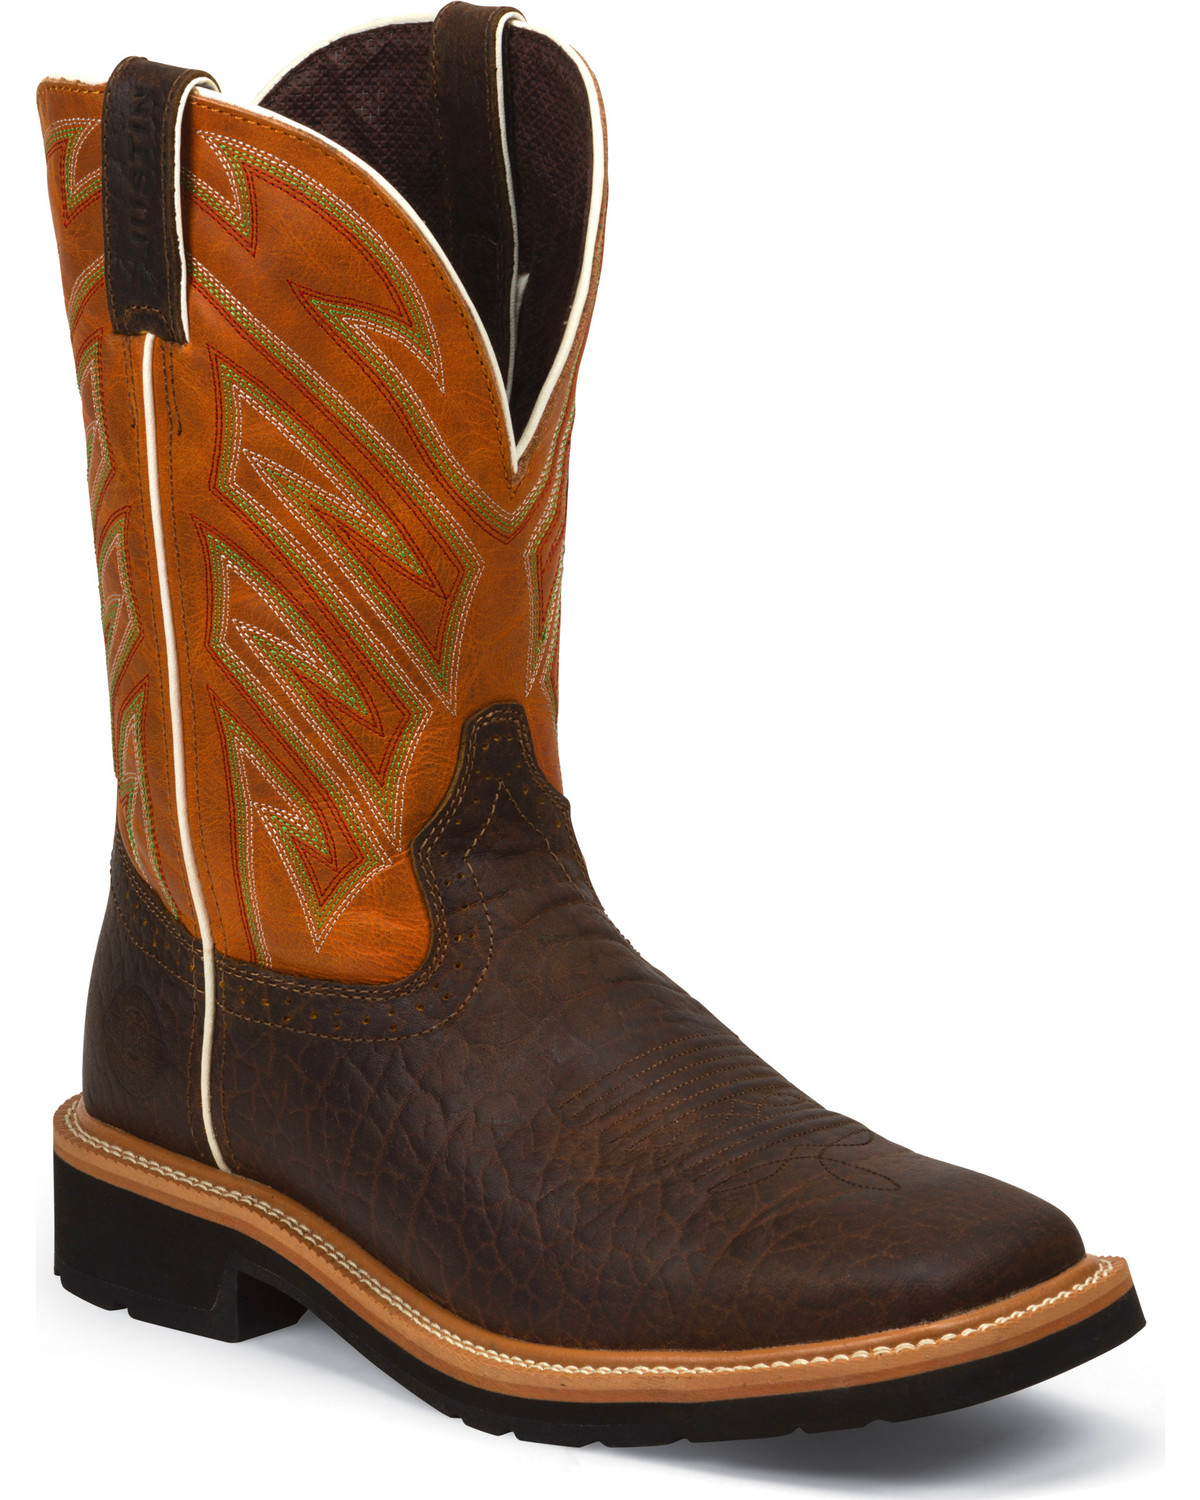 Justin Men's Square Toe Work Boots | Boot Barn